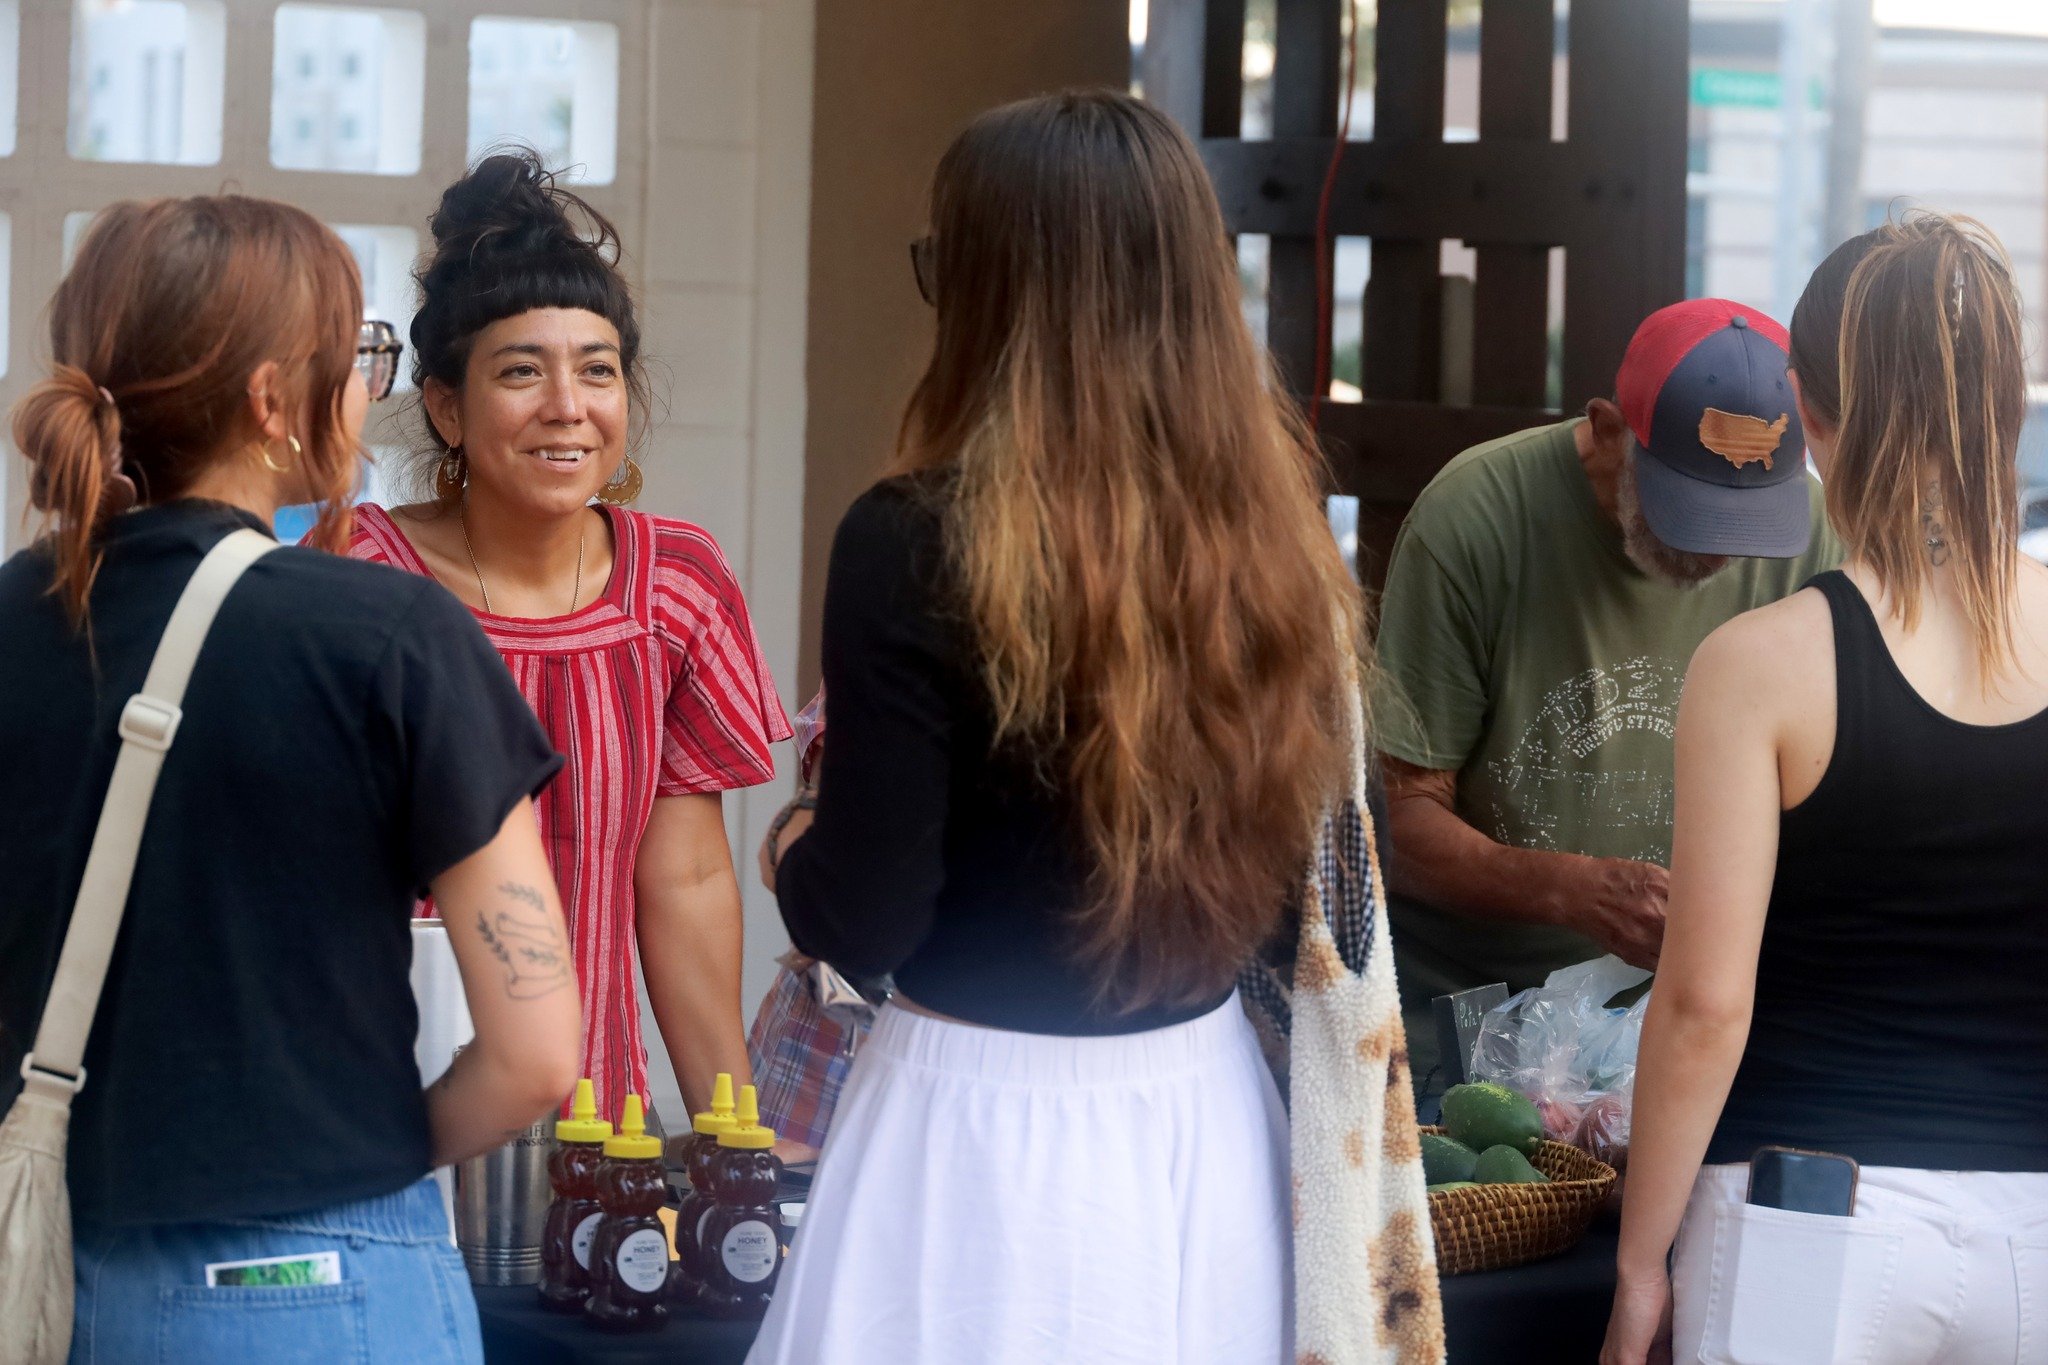 🤝 At the farmers' market, folks mingle among the stalls, savoring the sights and scents of locally sourced goodness. Conversations flow easily, sparked by shared interests in fresh produce and homemade treats. It's a simple pleasure, where people co